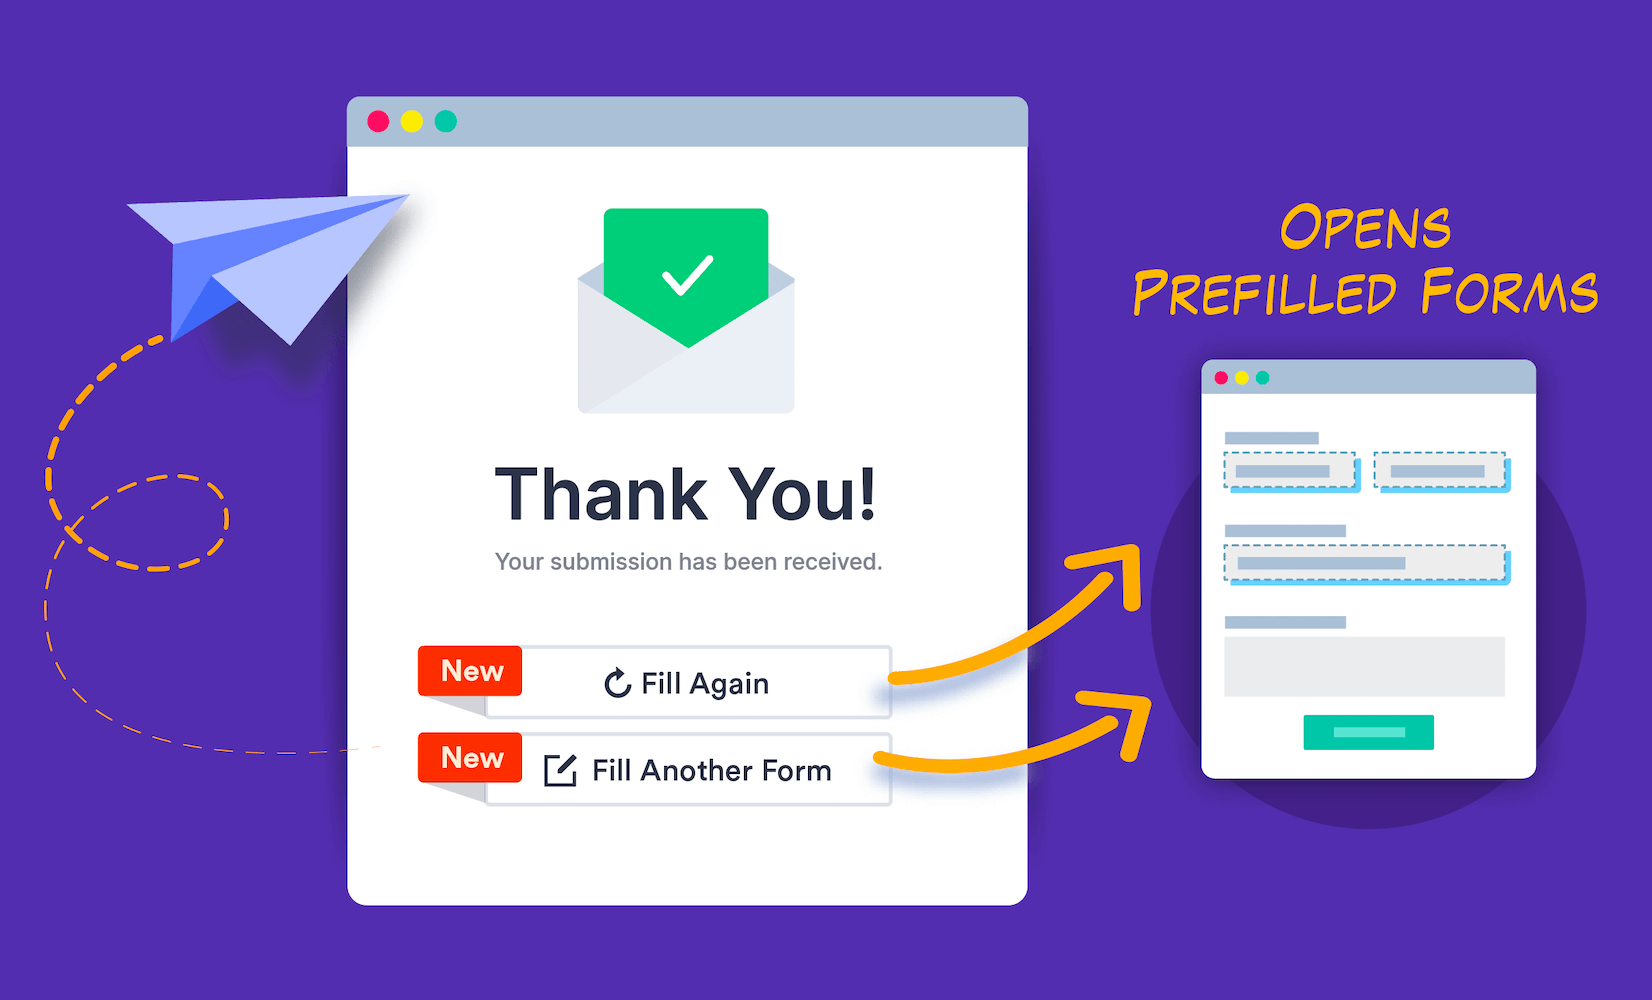 Direct responders to prefilled forms through your Thank You page